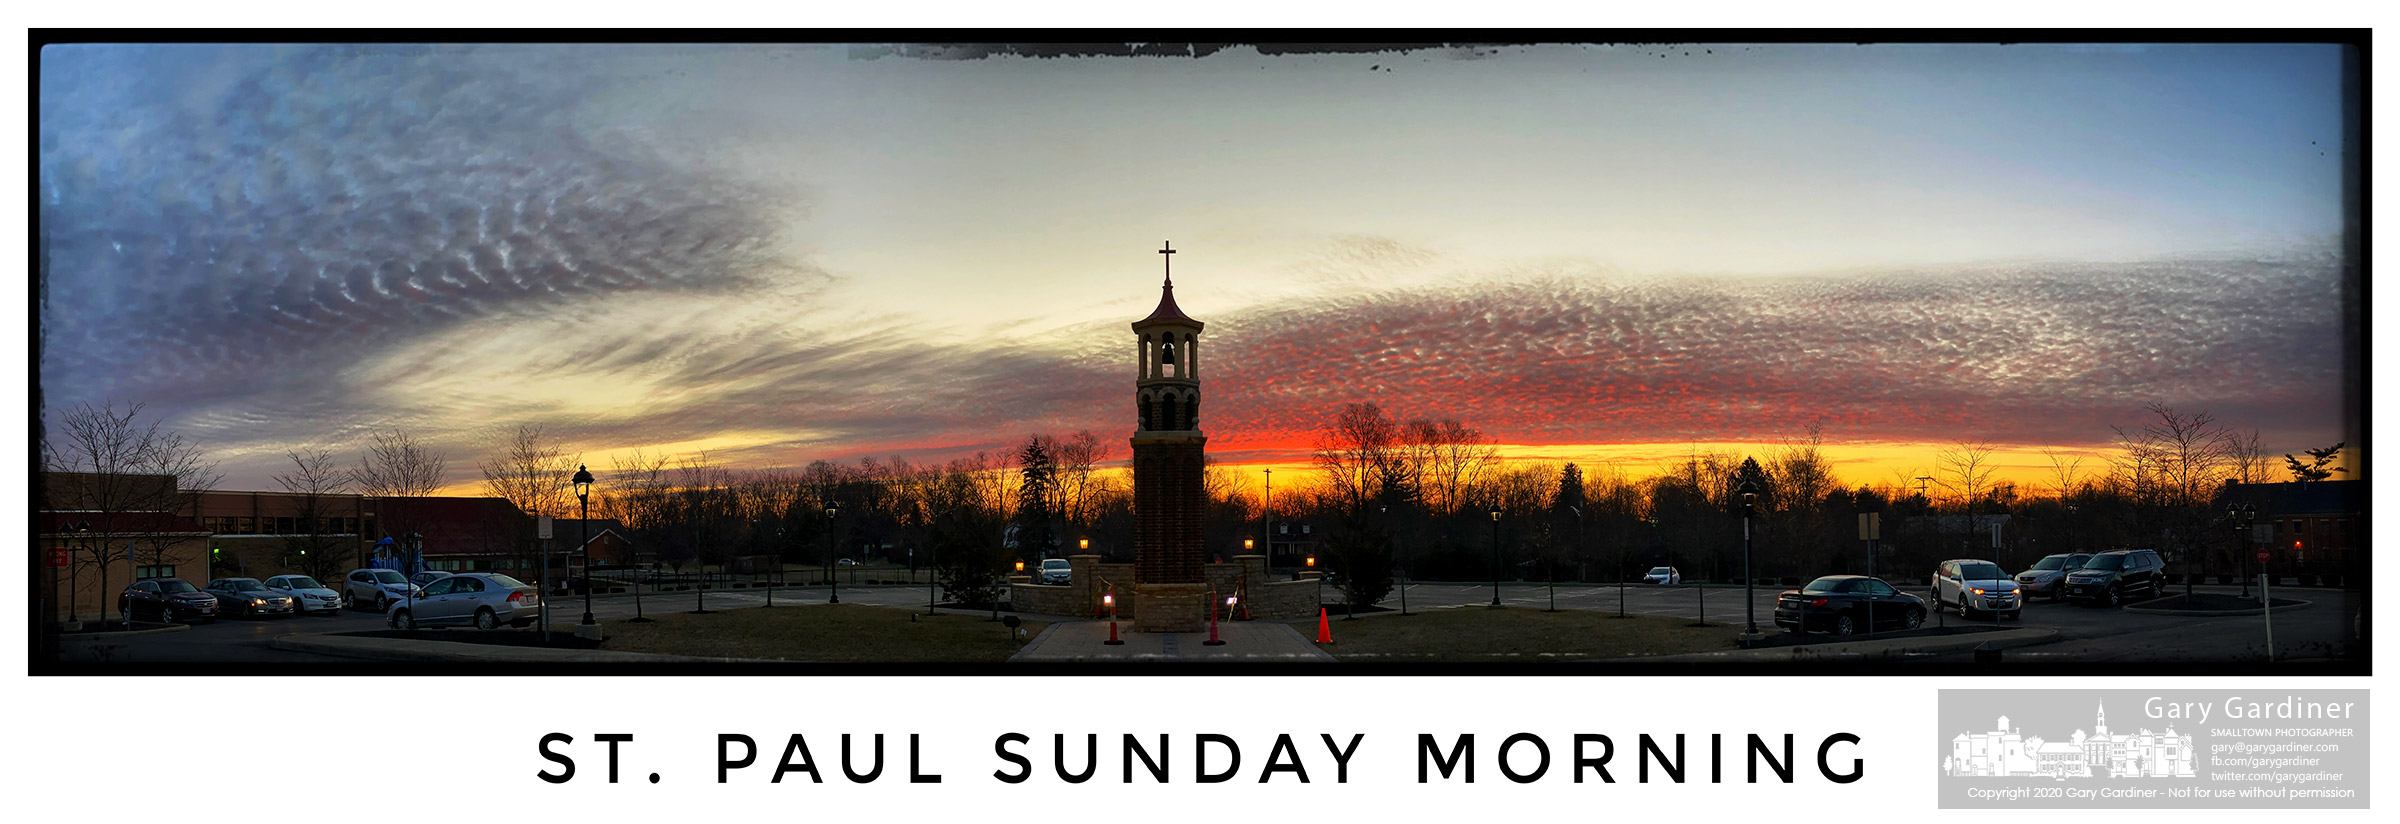 The morning sun rises a short time before the first Mass at St. Paul the Apostle Catholic Church in Westerville. My Final Photofor Feb. 23, 2020.